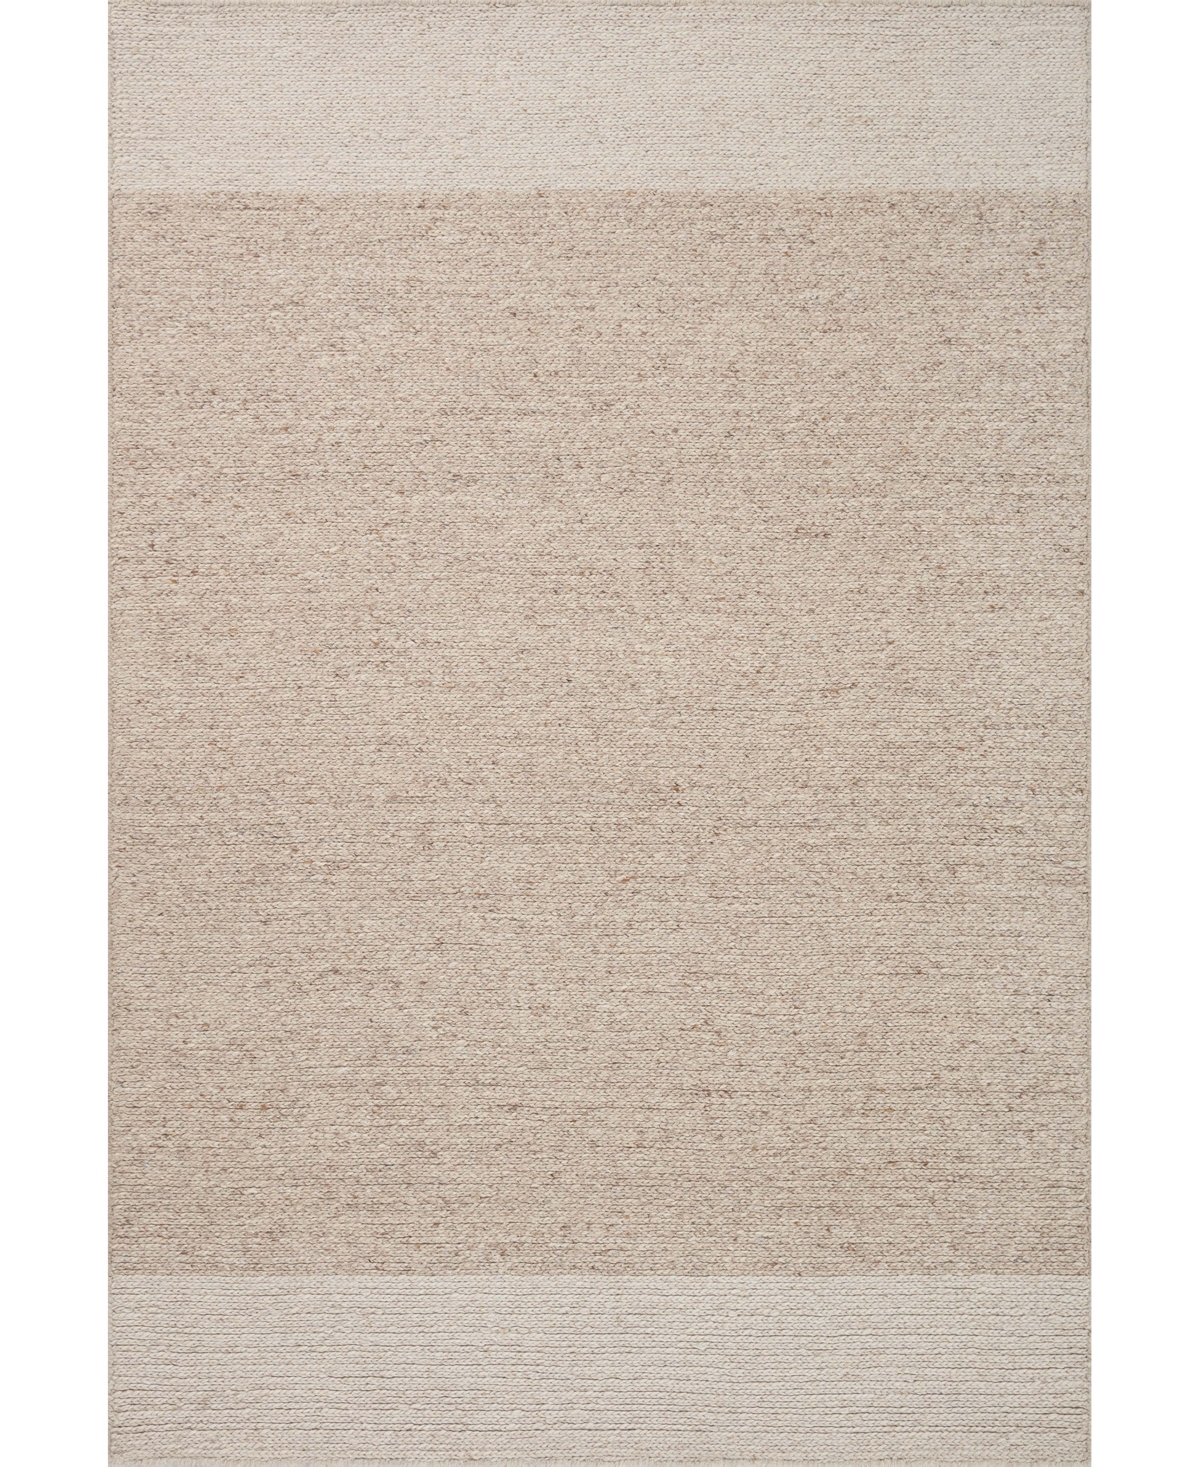 Magnolia Home By Joanna Gaines X Loloi Ashby Ash-05 3'6" X 5'6" Area Rug In Oatmeal